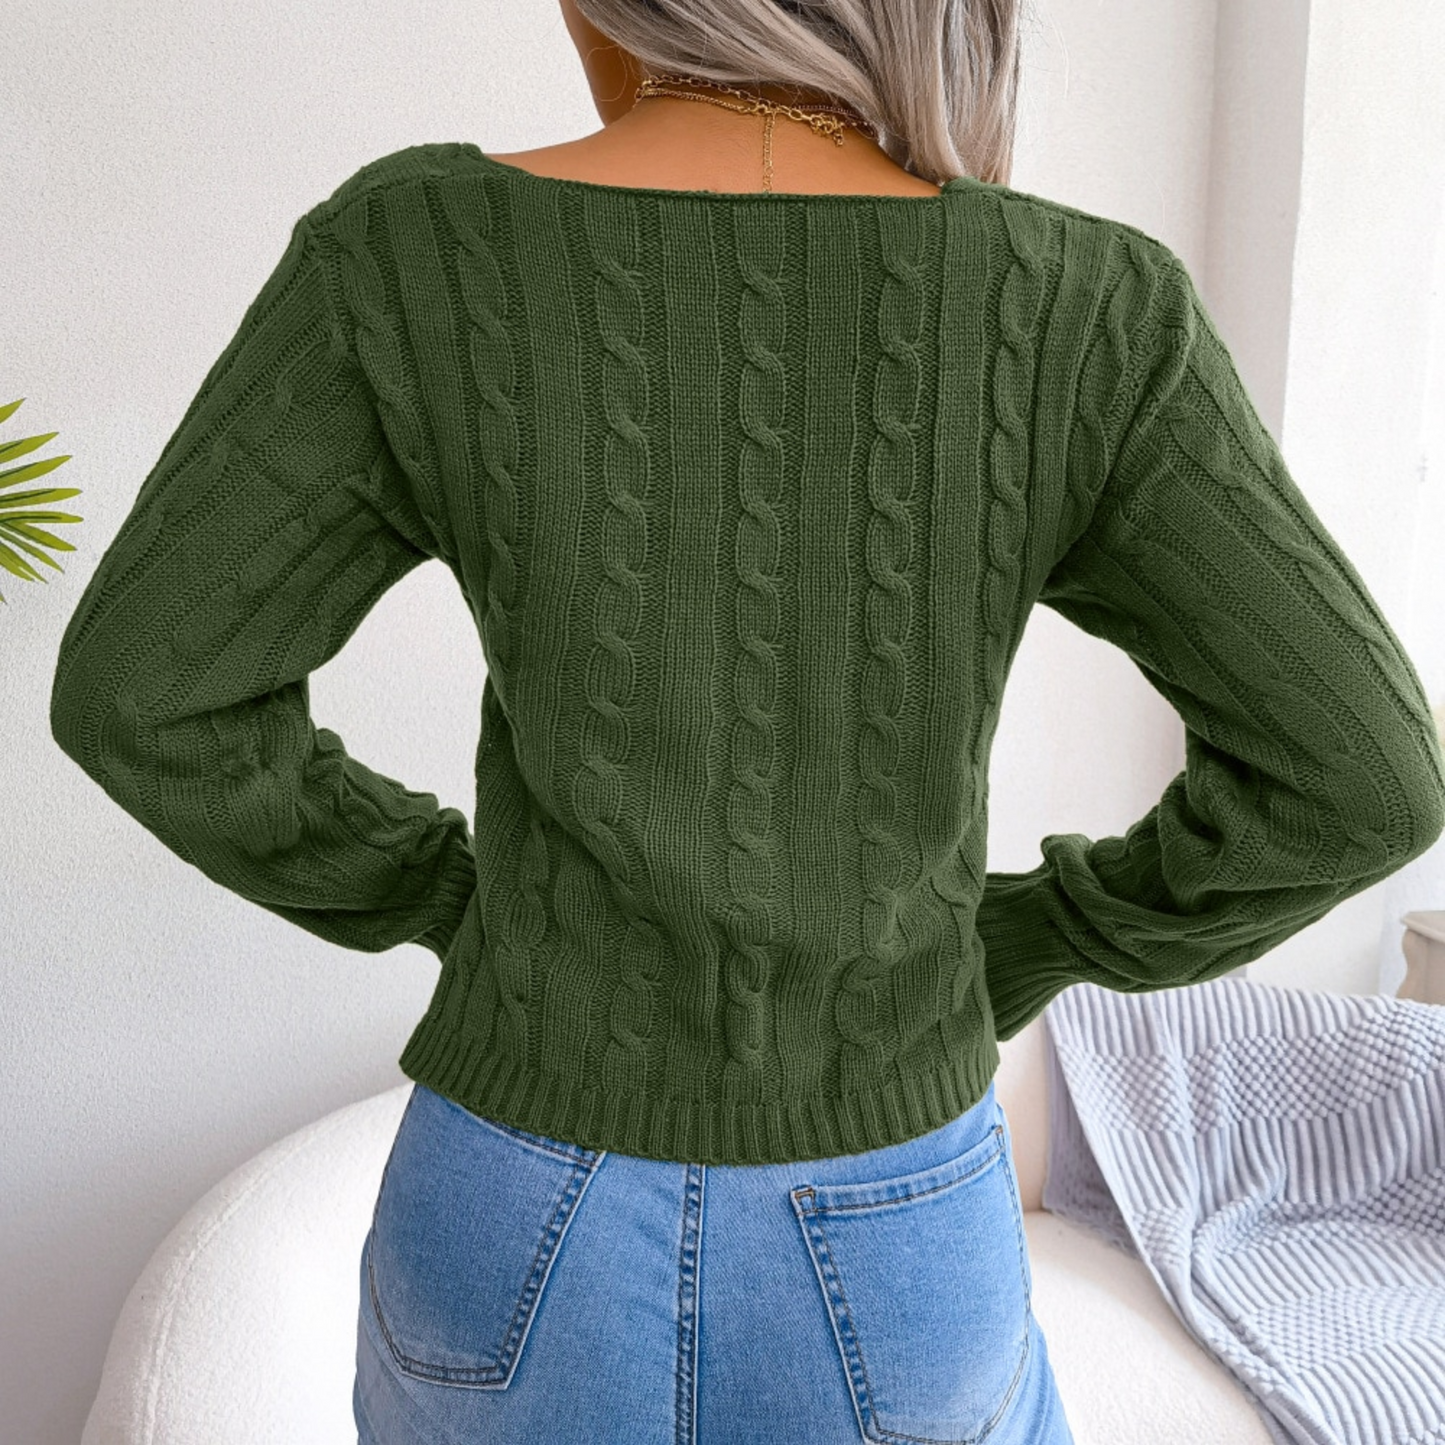 Gemma - Green Twisted Dough Knitted Sweater Top